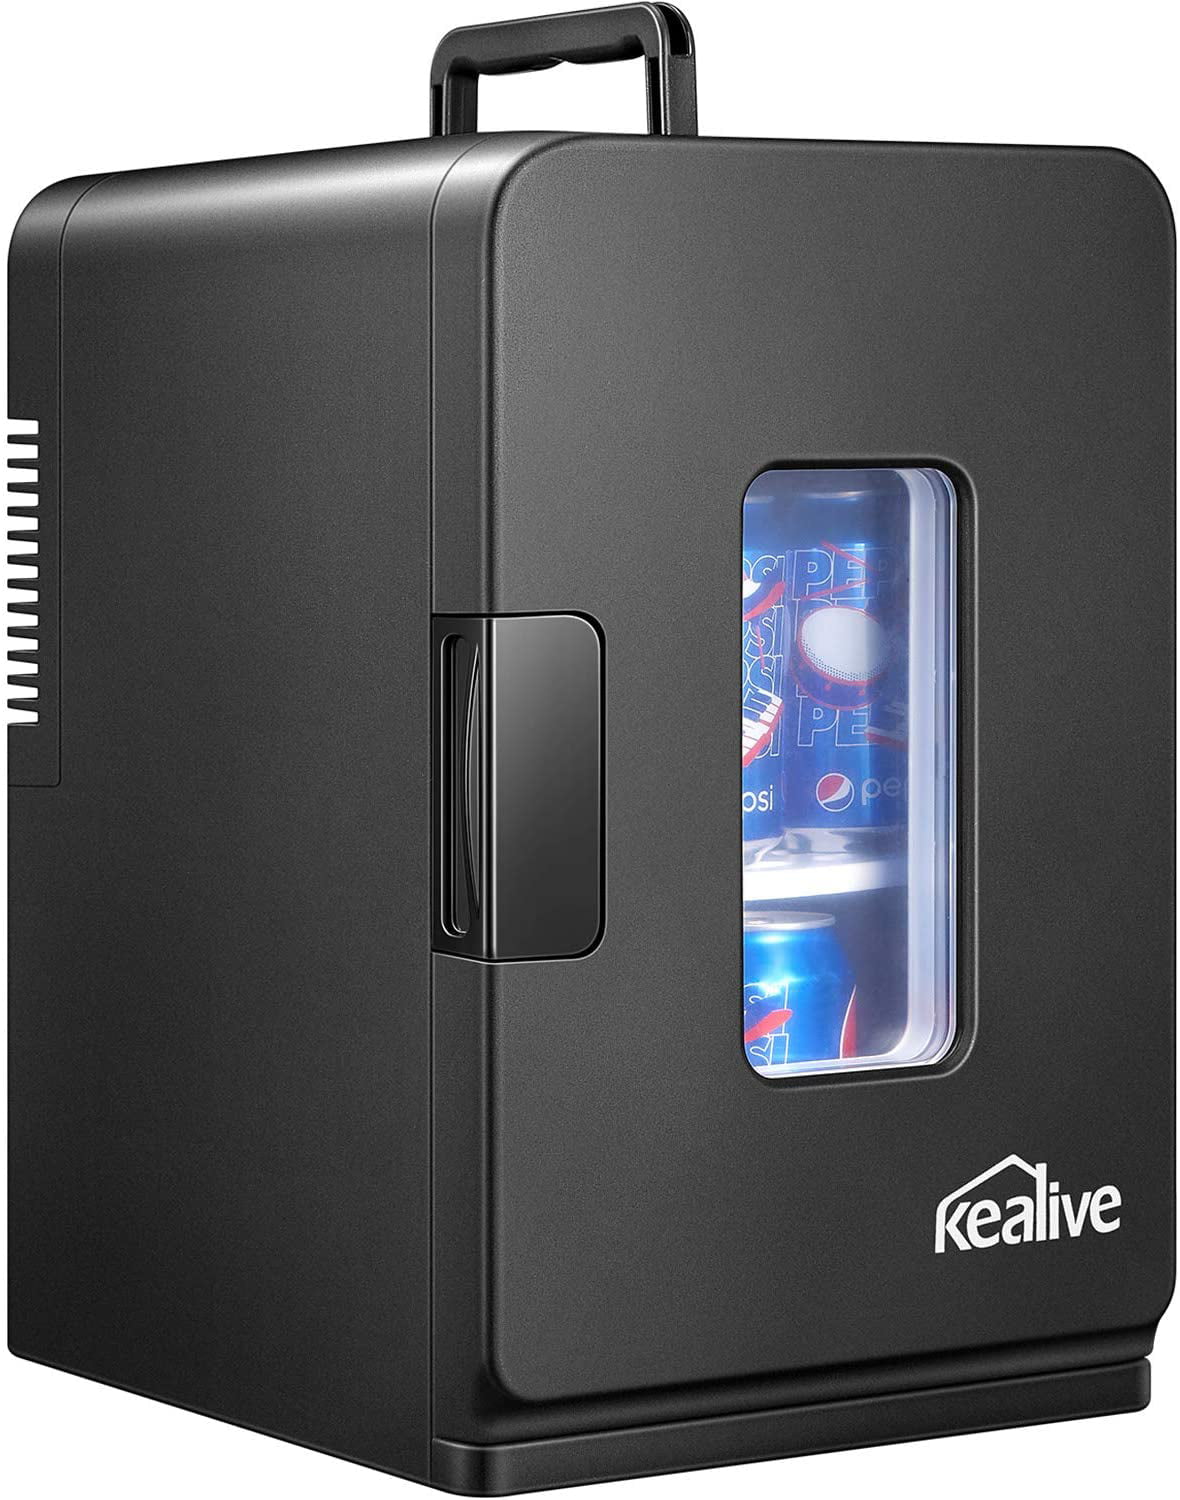 Kealive Mini Refrigerator Thermoelectric Electric Cooler and Warmer YTA15X 